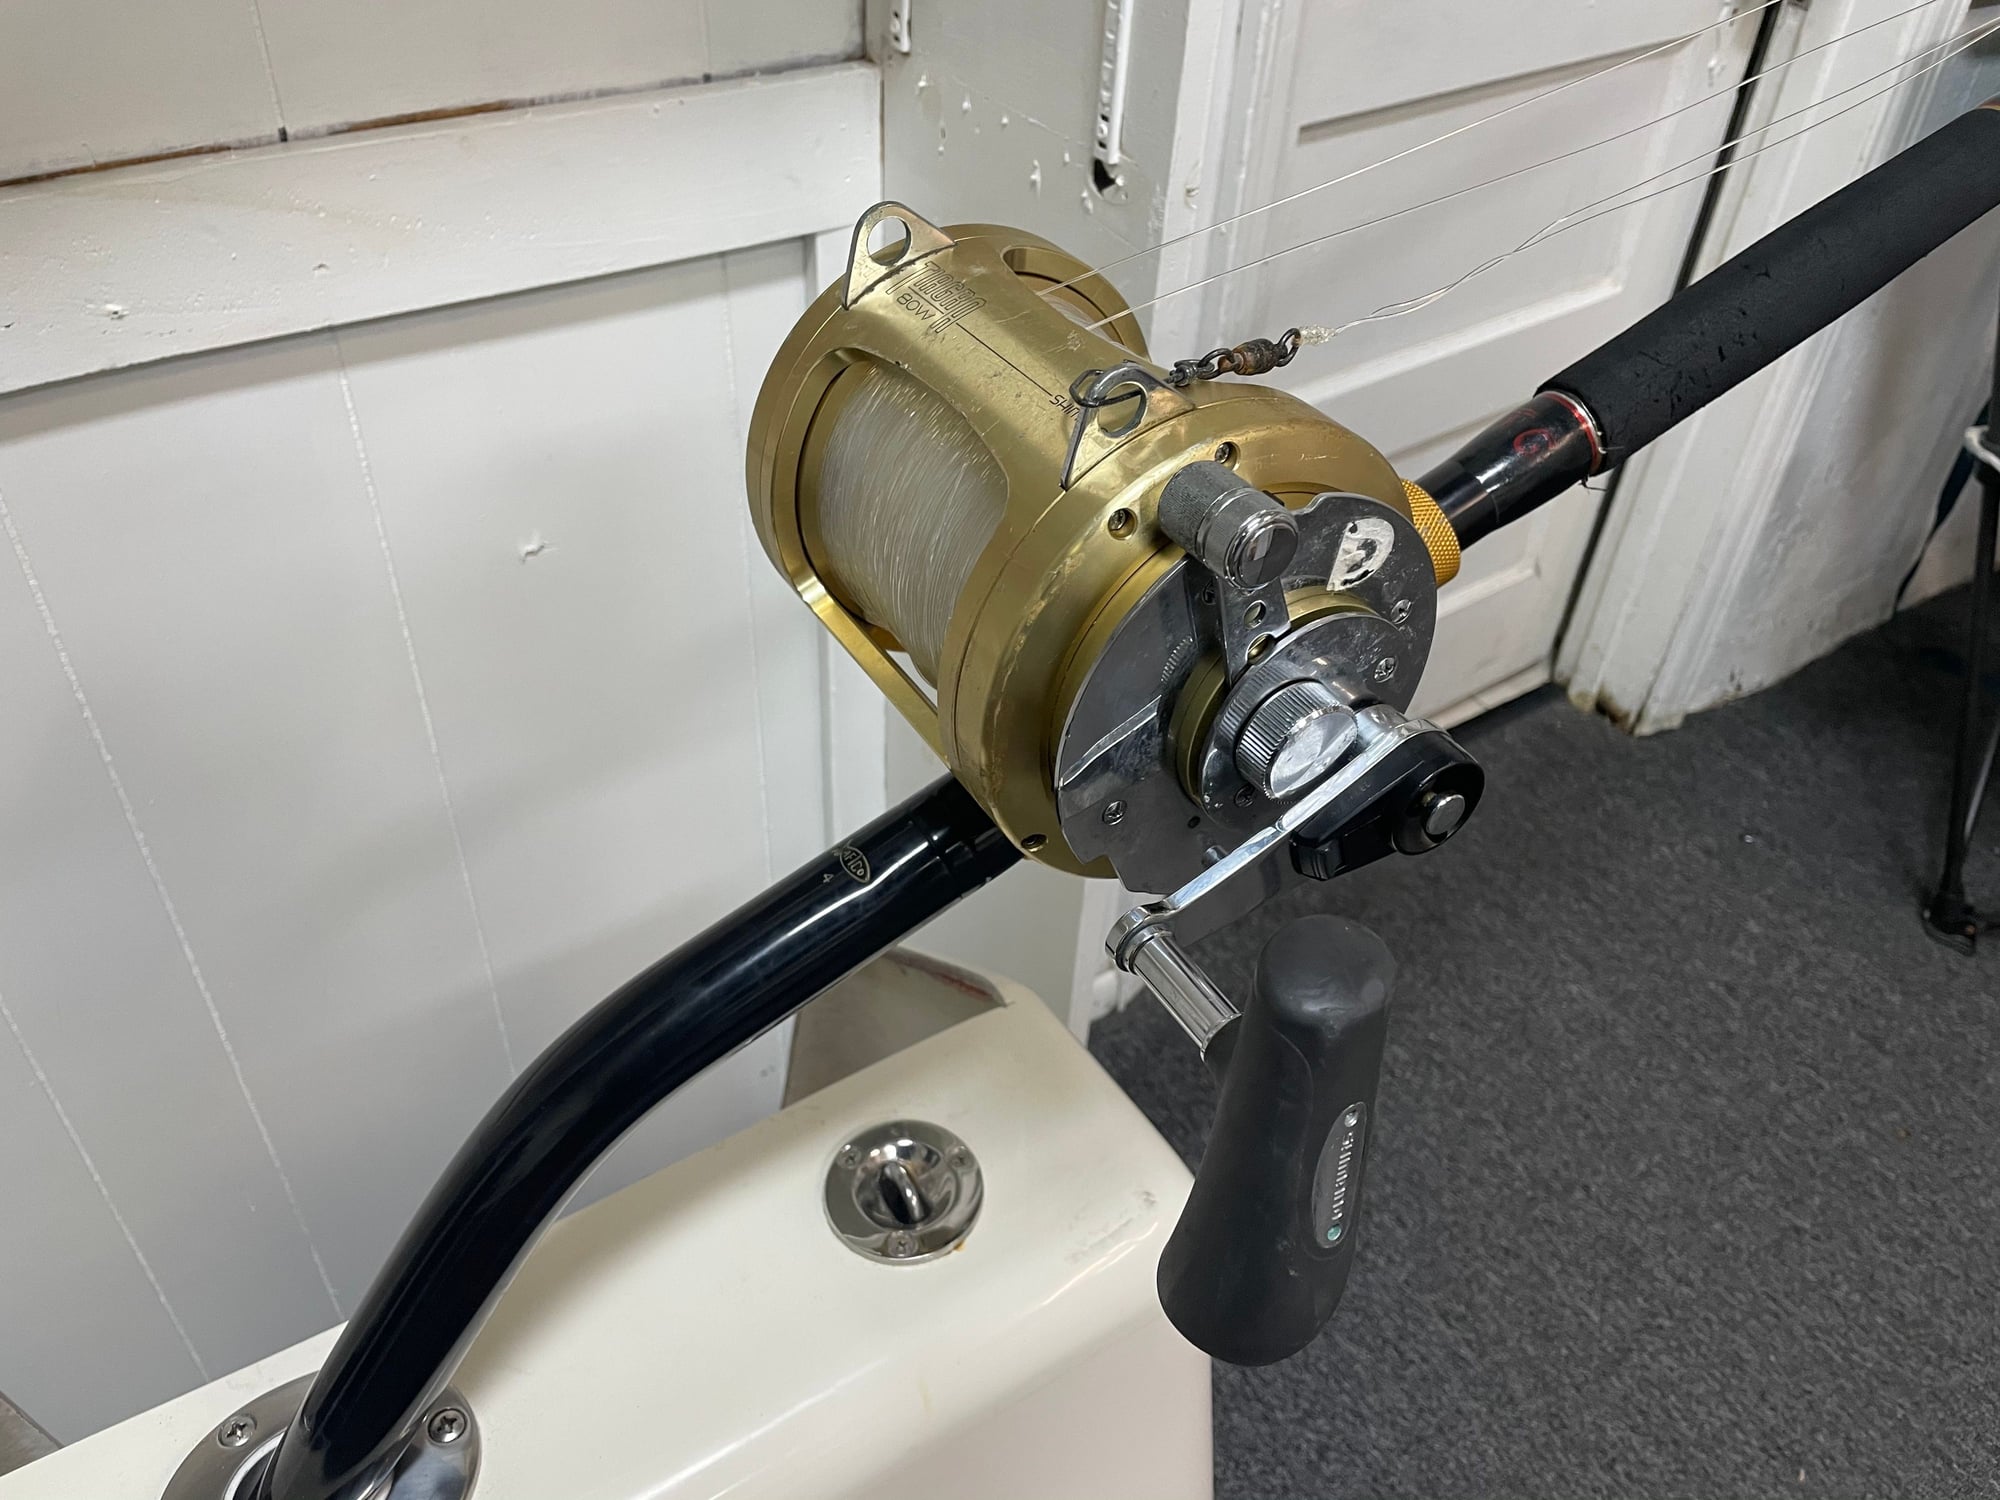 SOLD. 3 Shimano Tiagra 80W for sale - The Hull Truth - Boating and Fishing  Forum